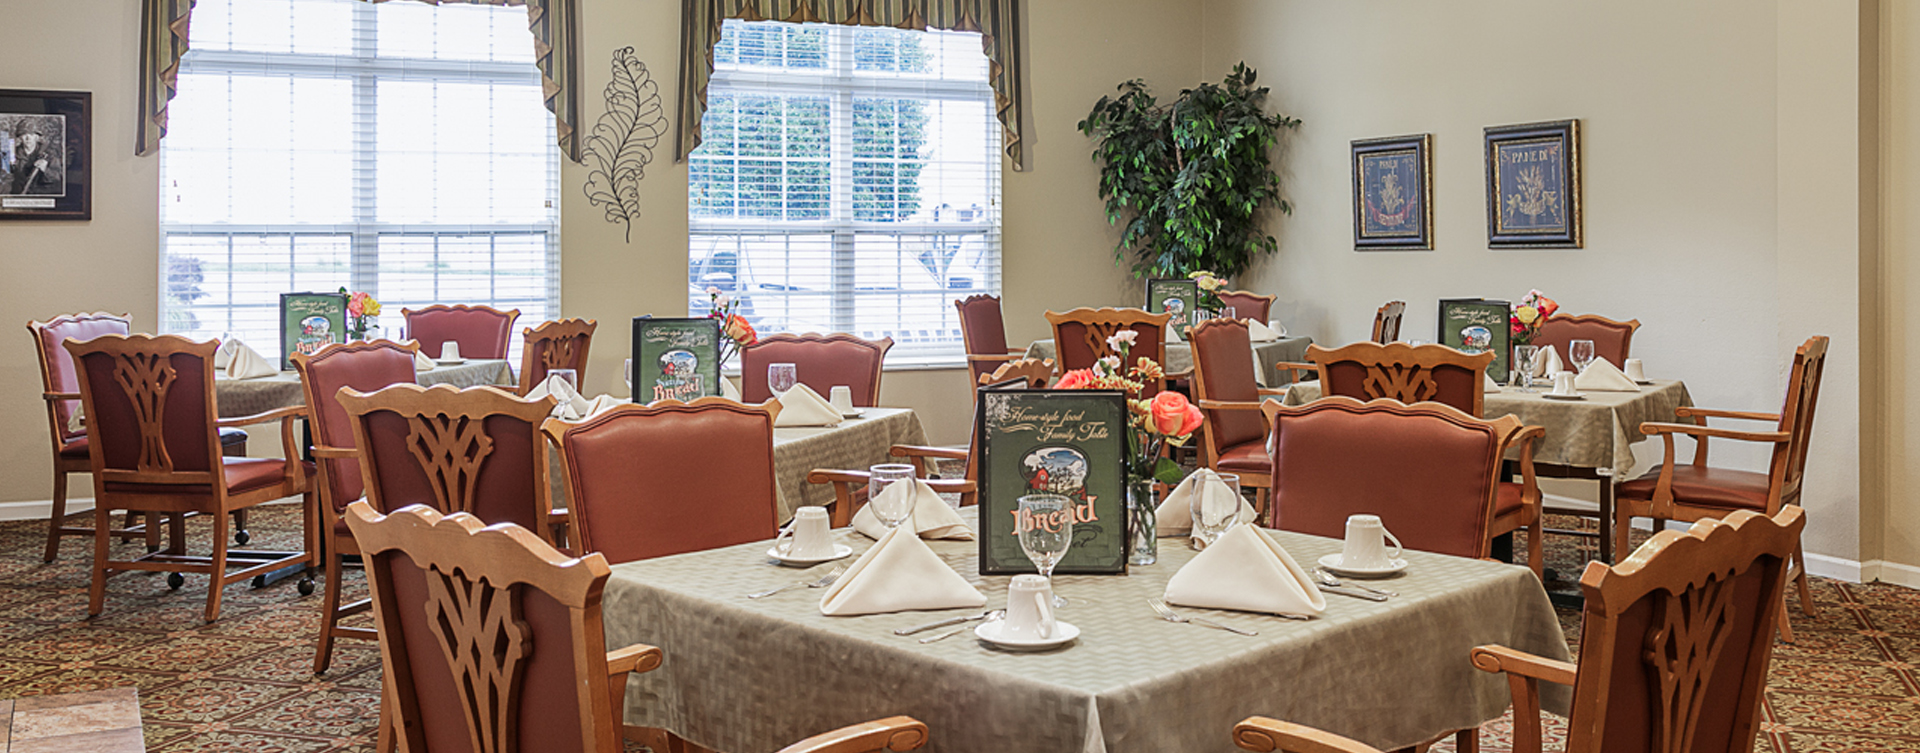 Food is best when shared with friends in the dining room at Bickford of Omaha - Hickory